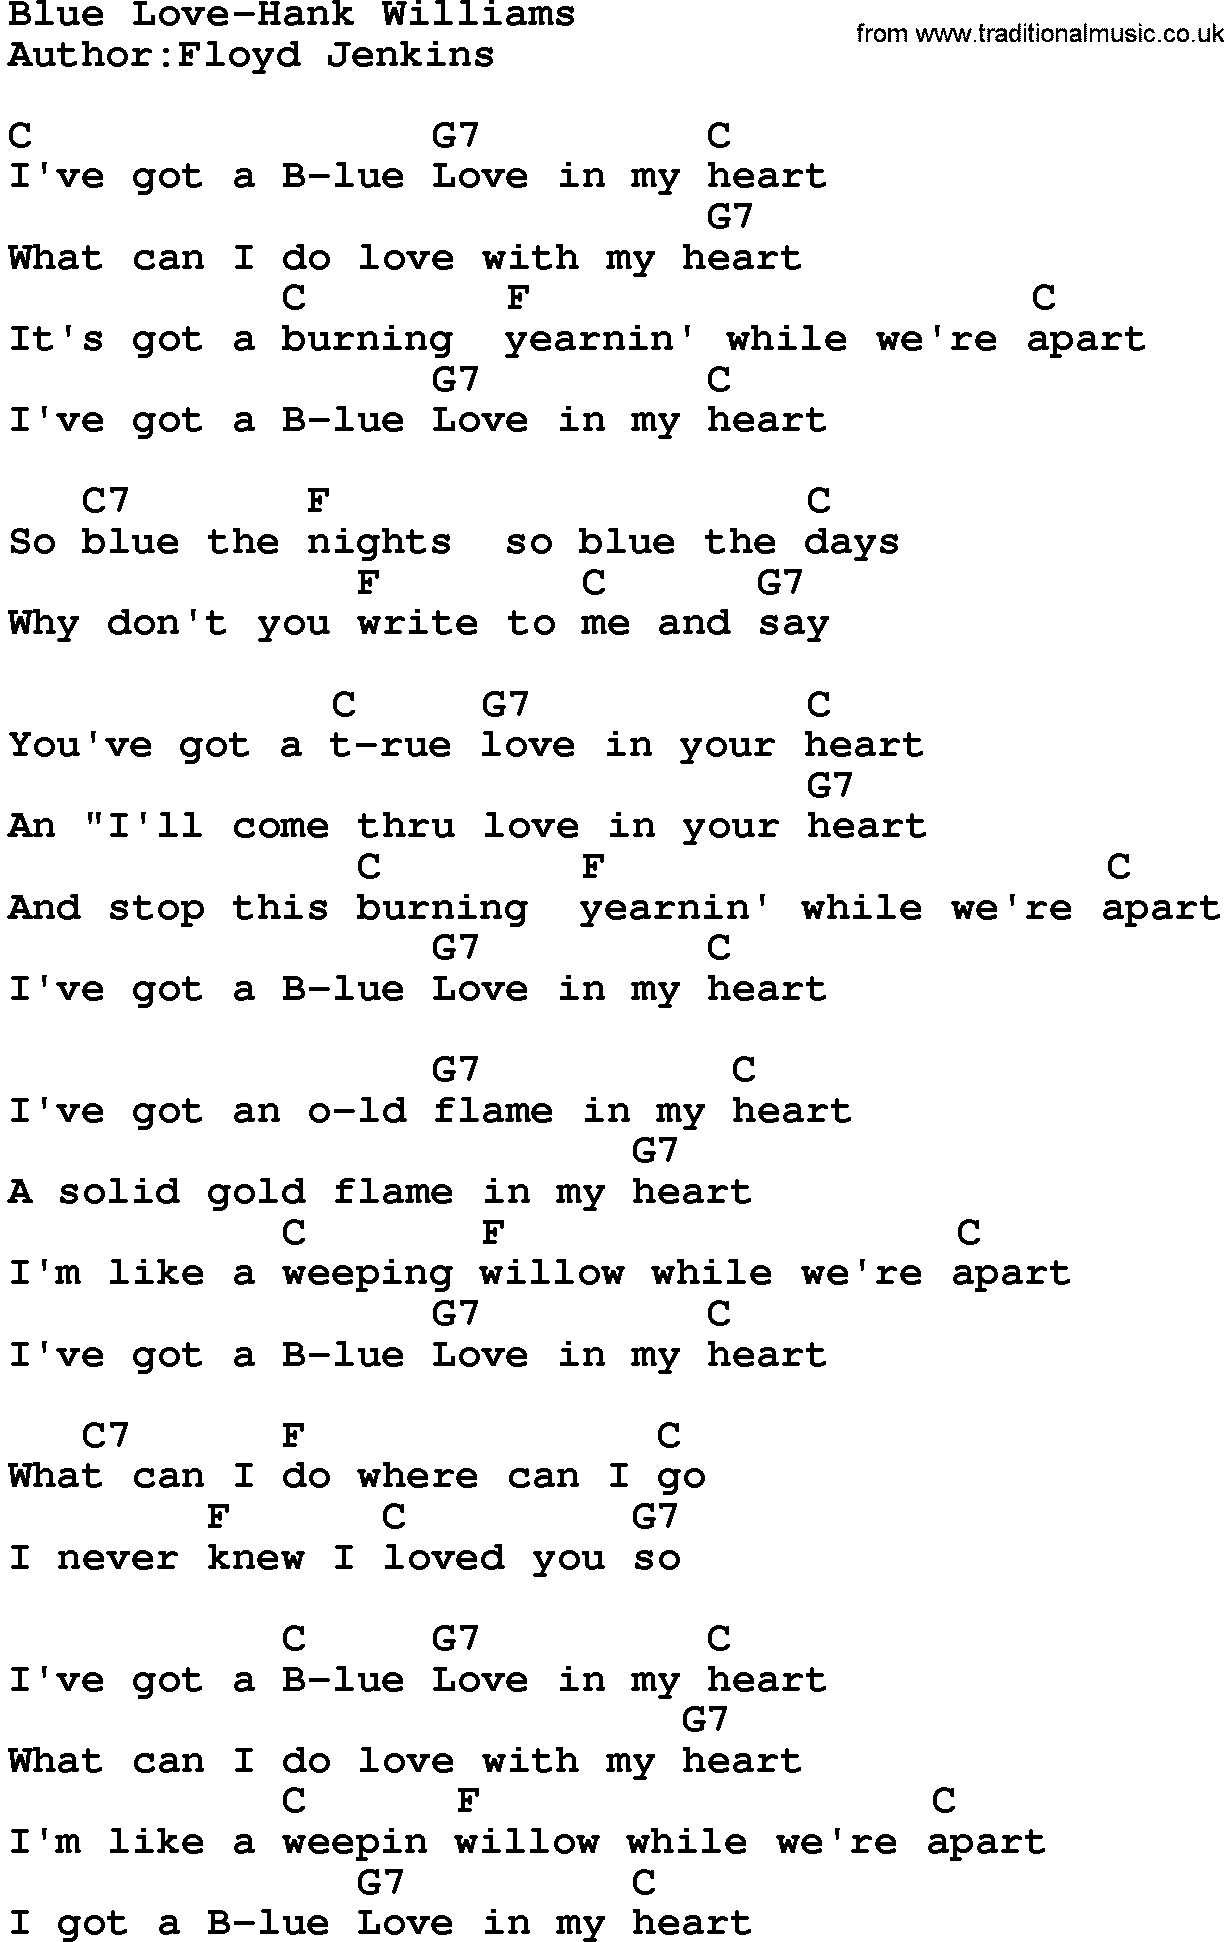 Country music song: Blue Love-Hank Williams lyrics and chords